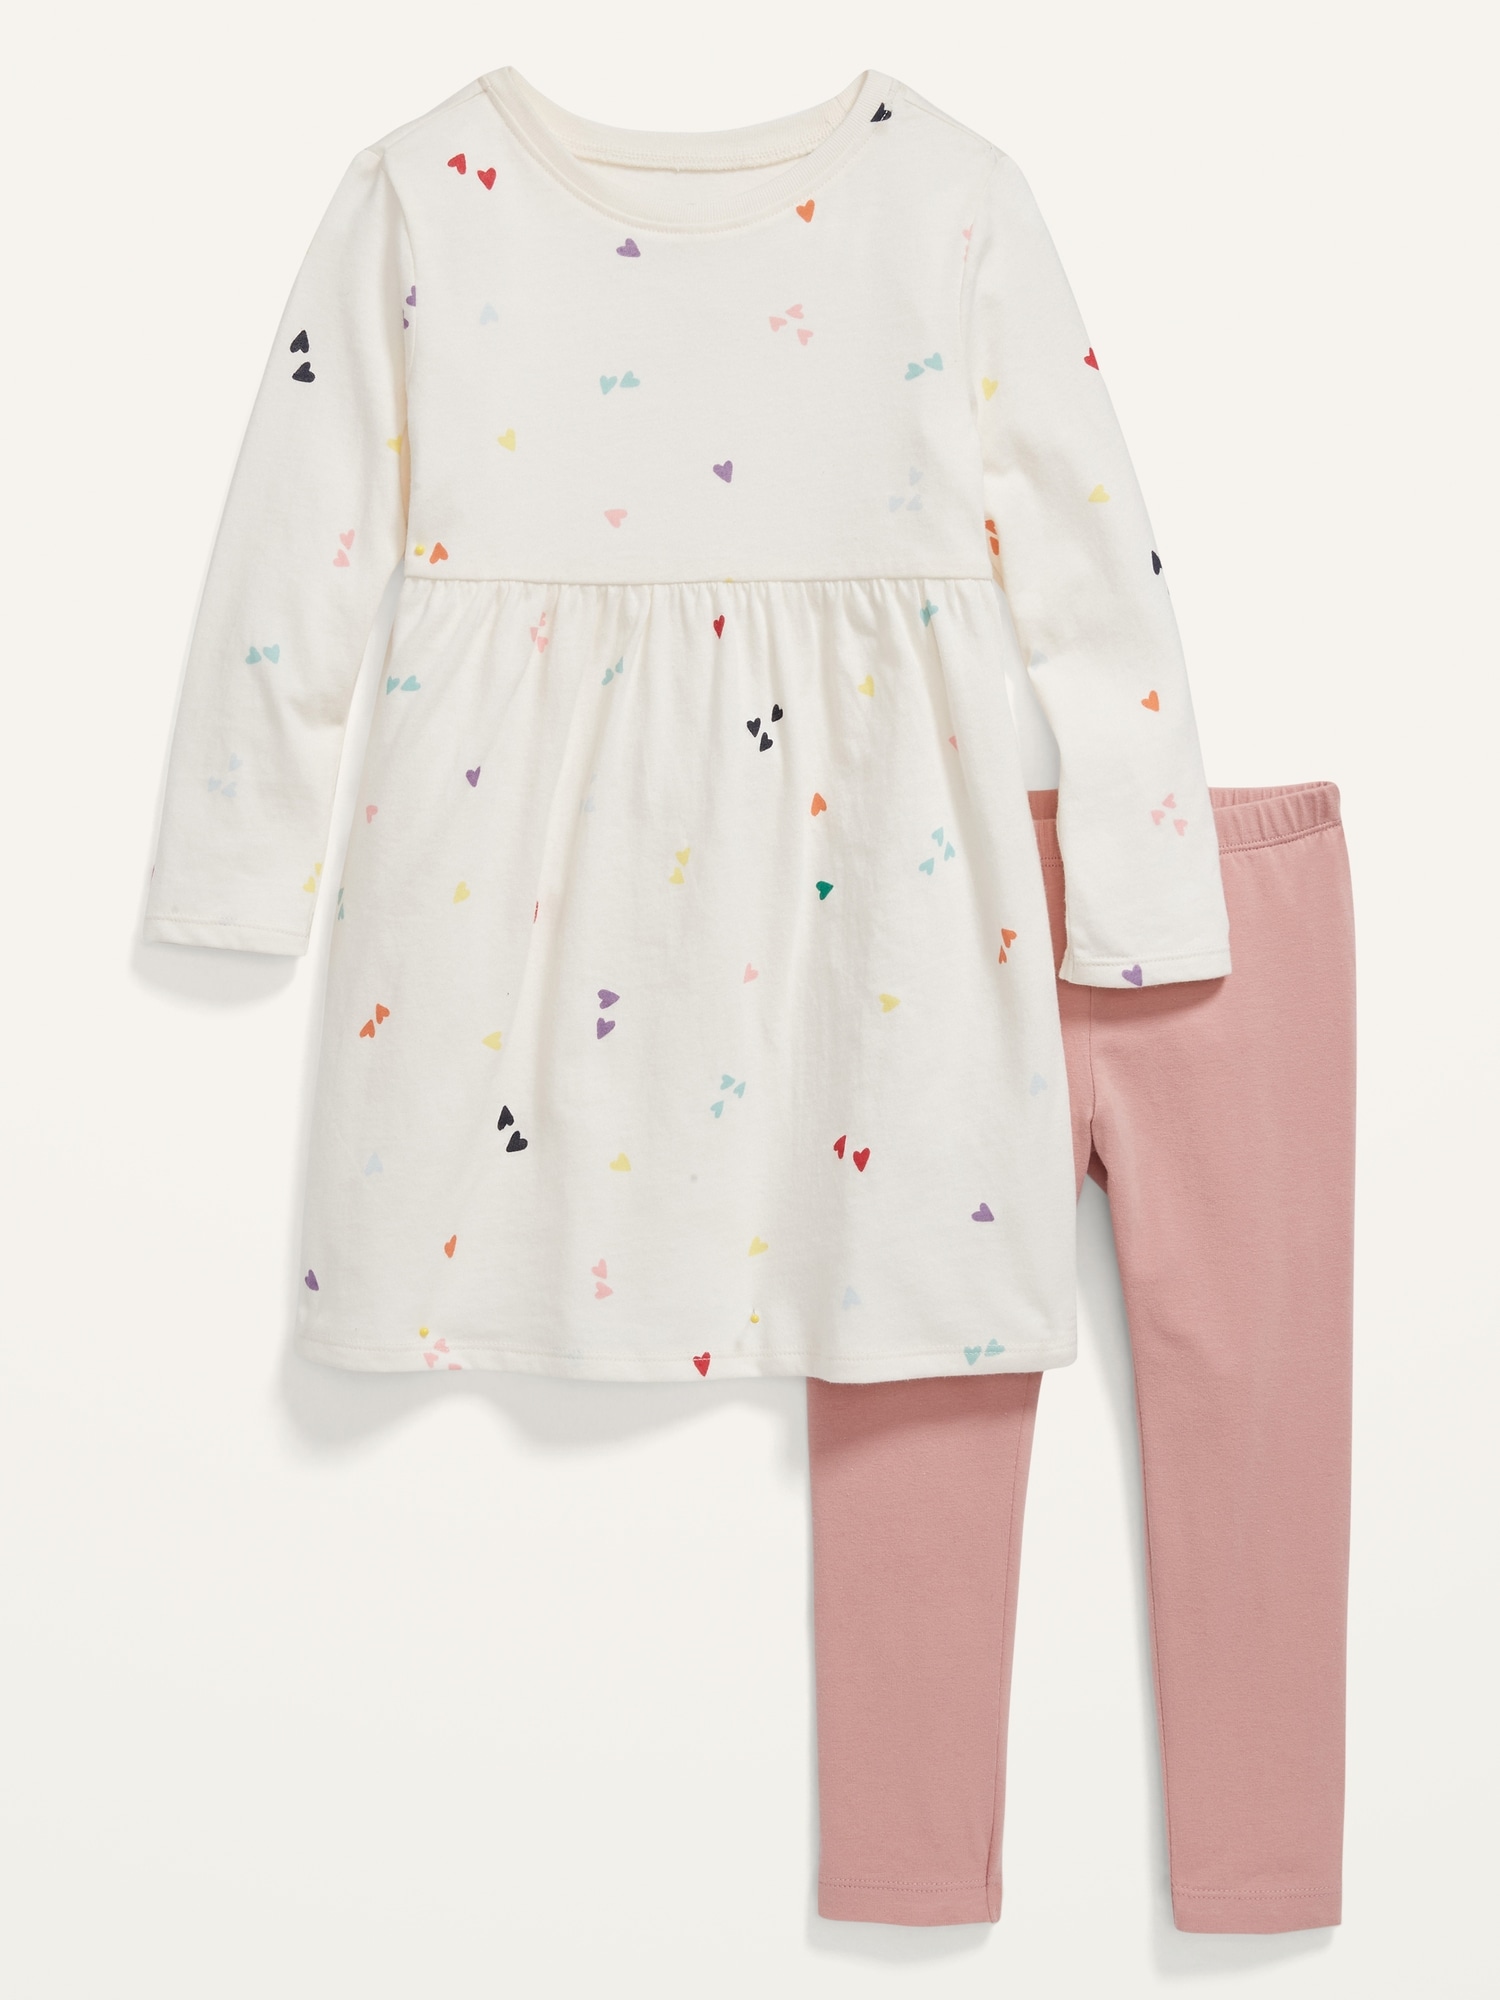 Long-Sleeve Printed Dress and Solid Leggings Set for Toddler Girls